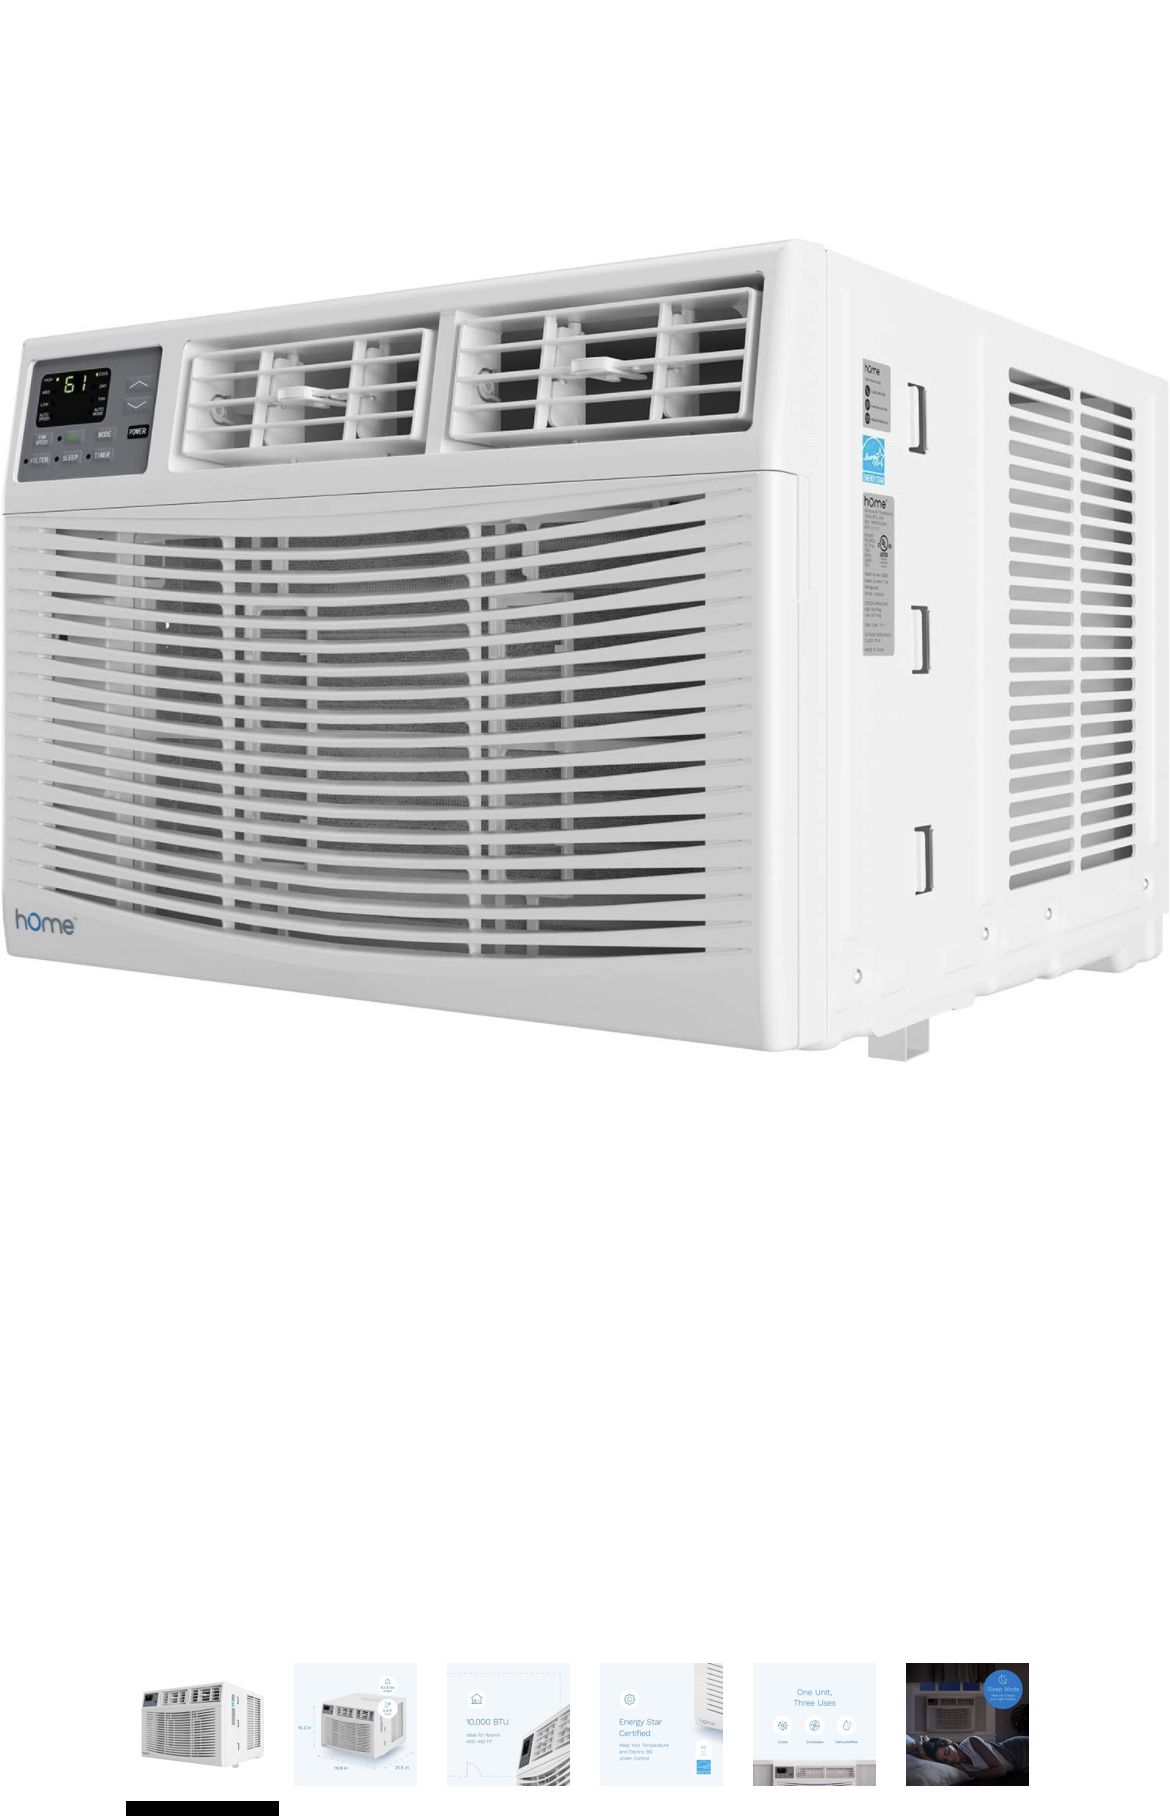 hOmeLabs Window Air Conditioner 10000 BTU - Energy Star Certified, Digital Thermostat, Remote Control - Ideal for Rooms up to 450 Sq. Ft.